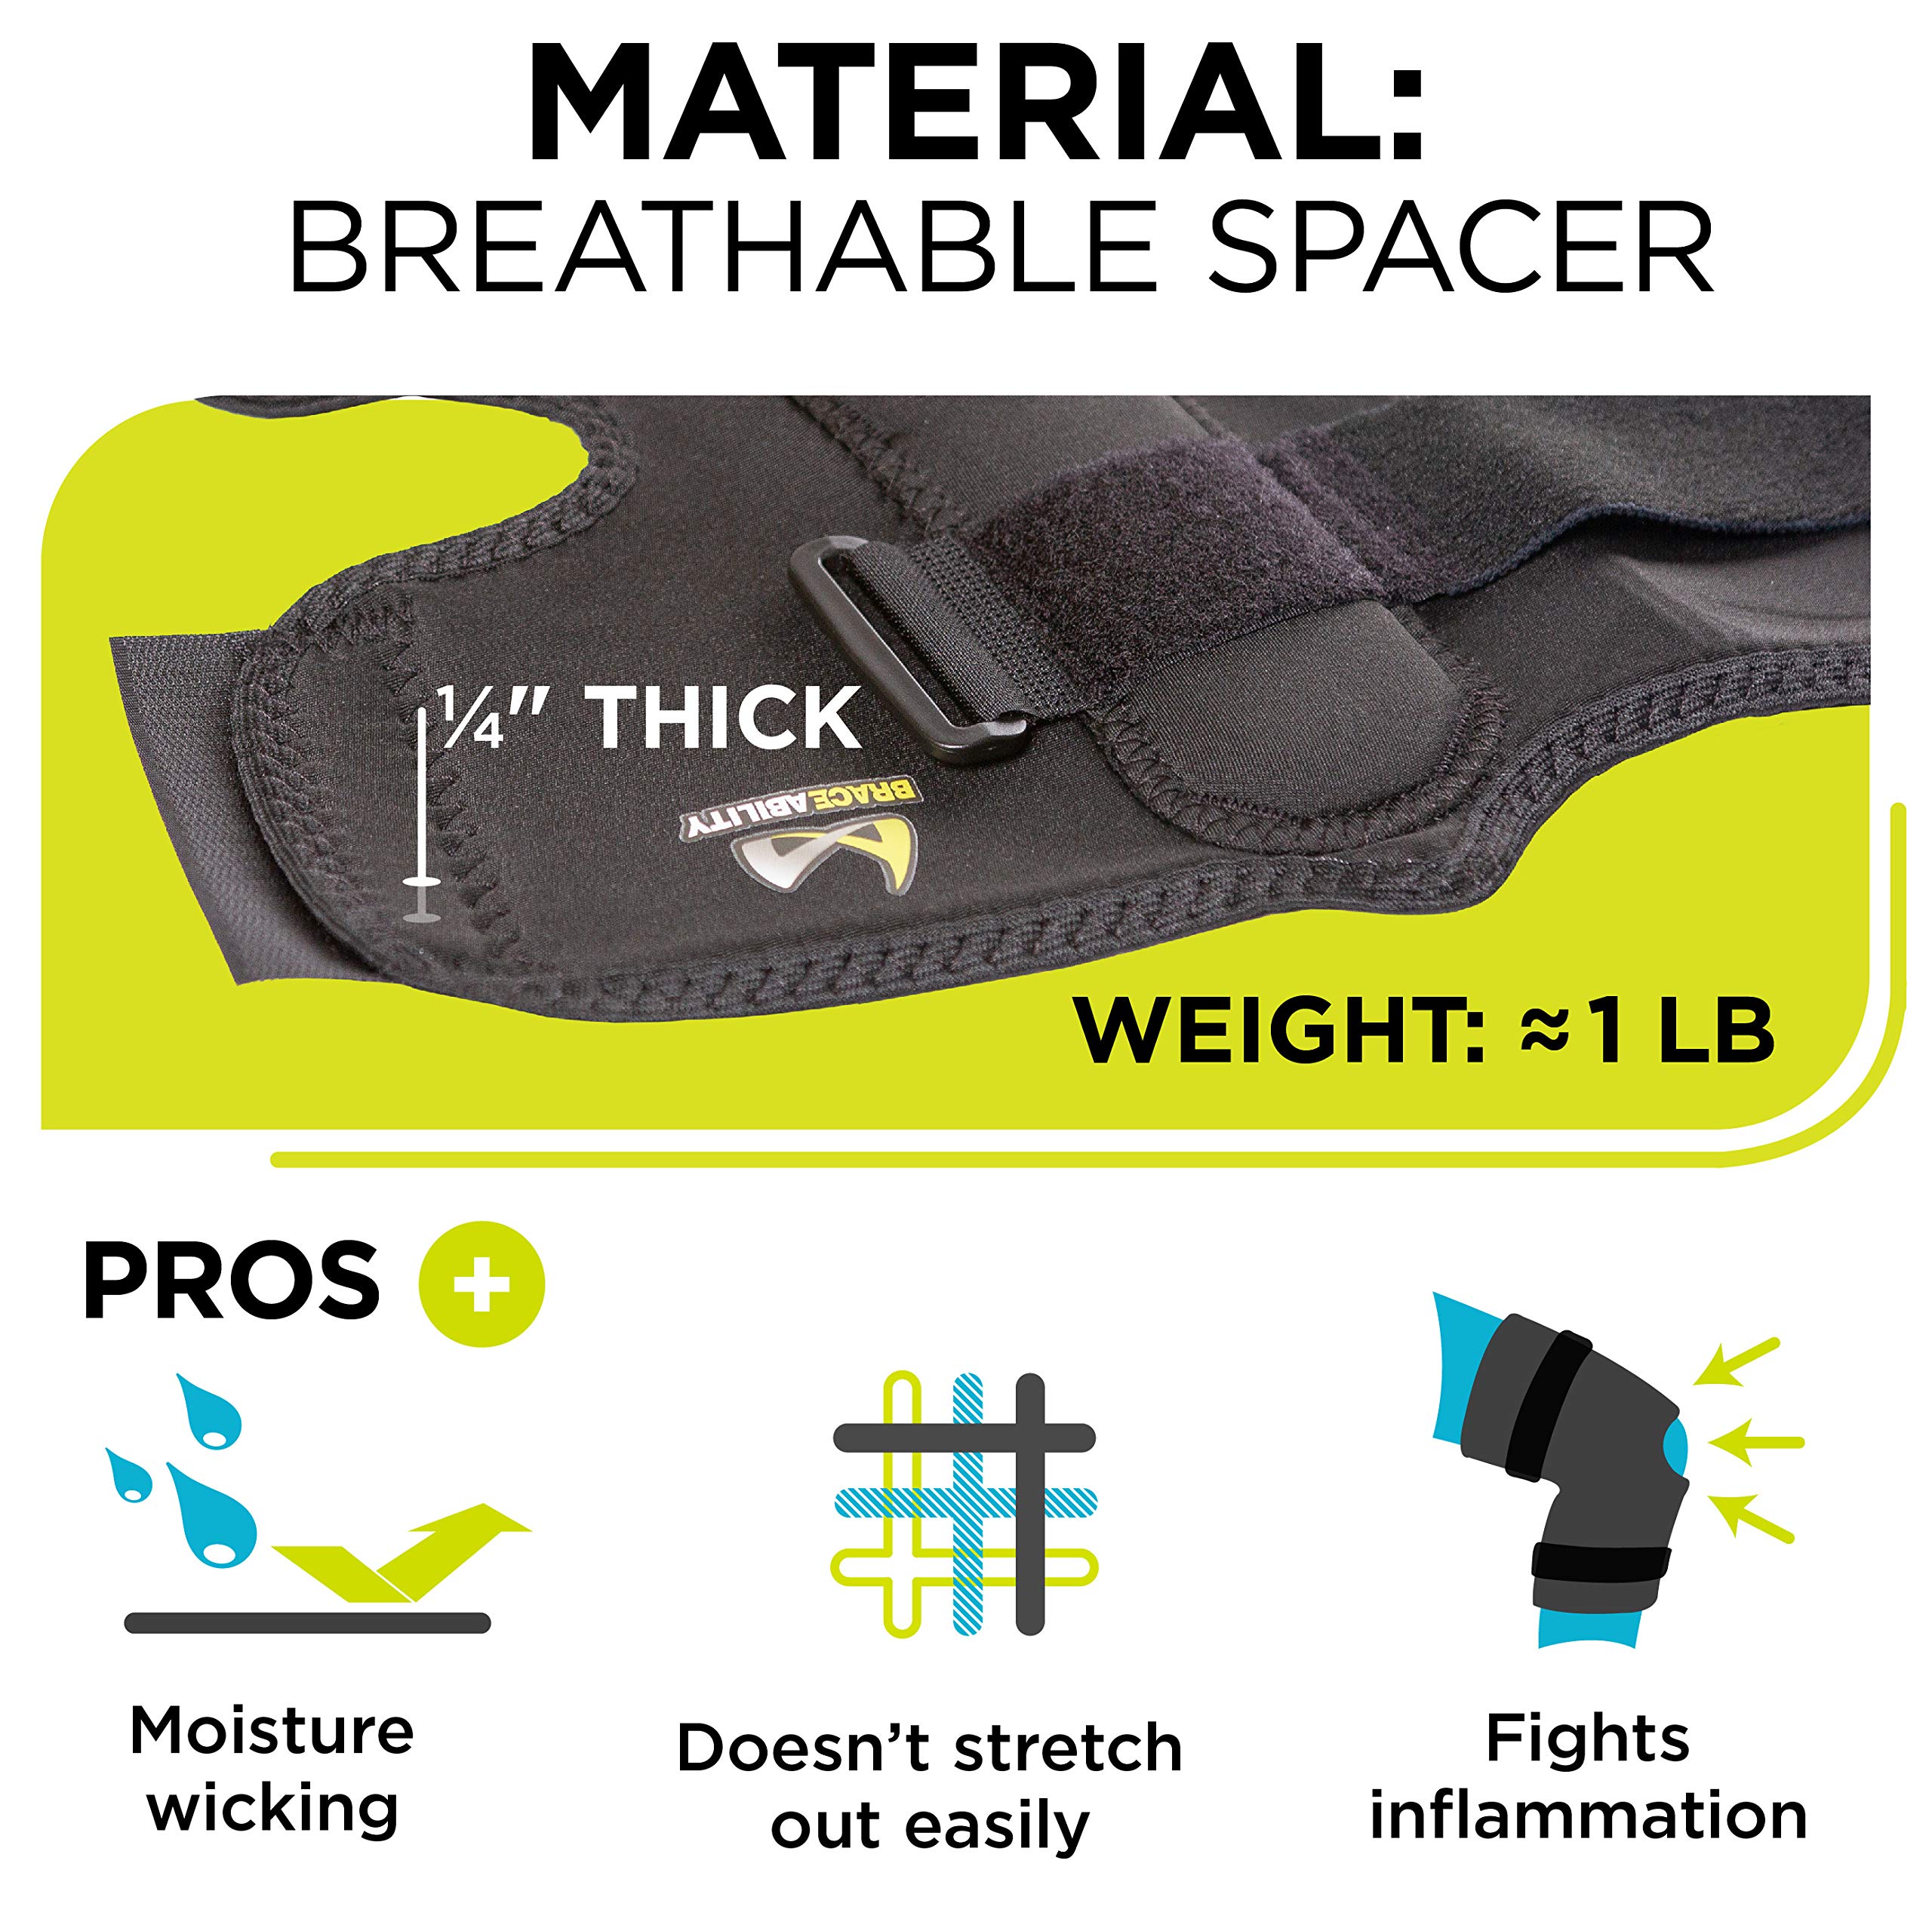 BraceAbility Obesity Hinged Knee Pain Brace - Overweight Men and Women's Wraparound Plus-Size Support for Osteoarthritis, Weak Joints, Medial and Lateral Kneecap Instability (Large)